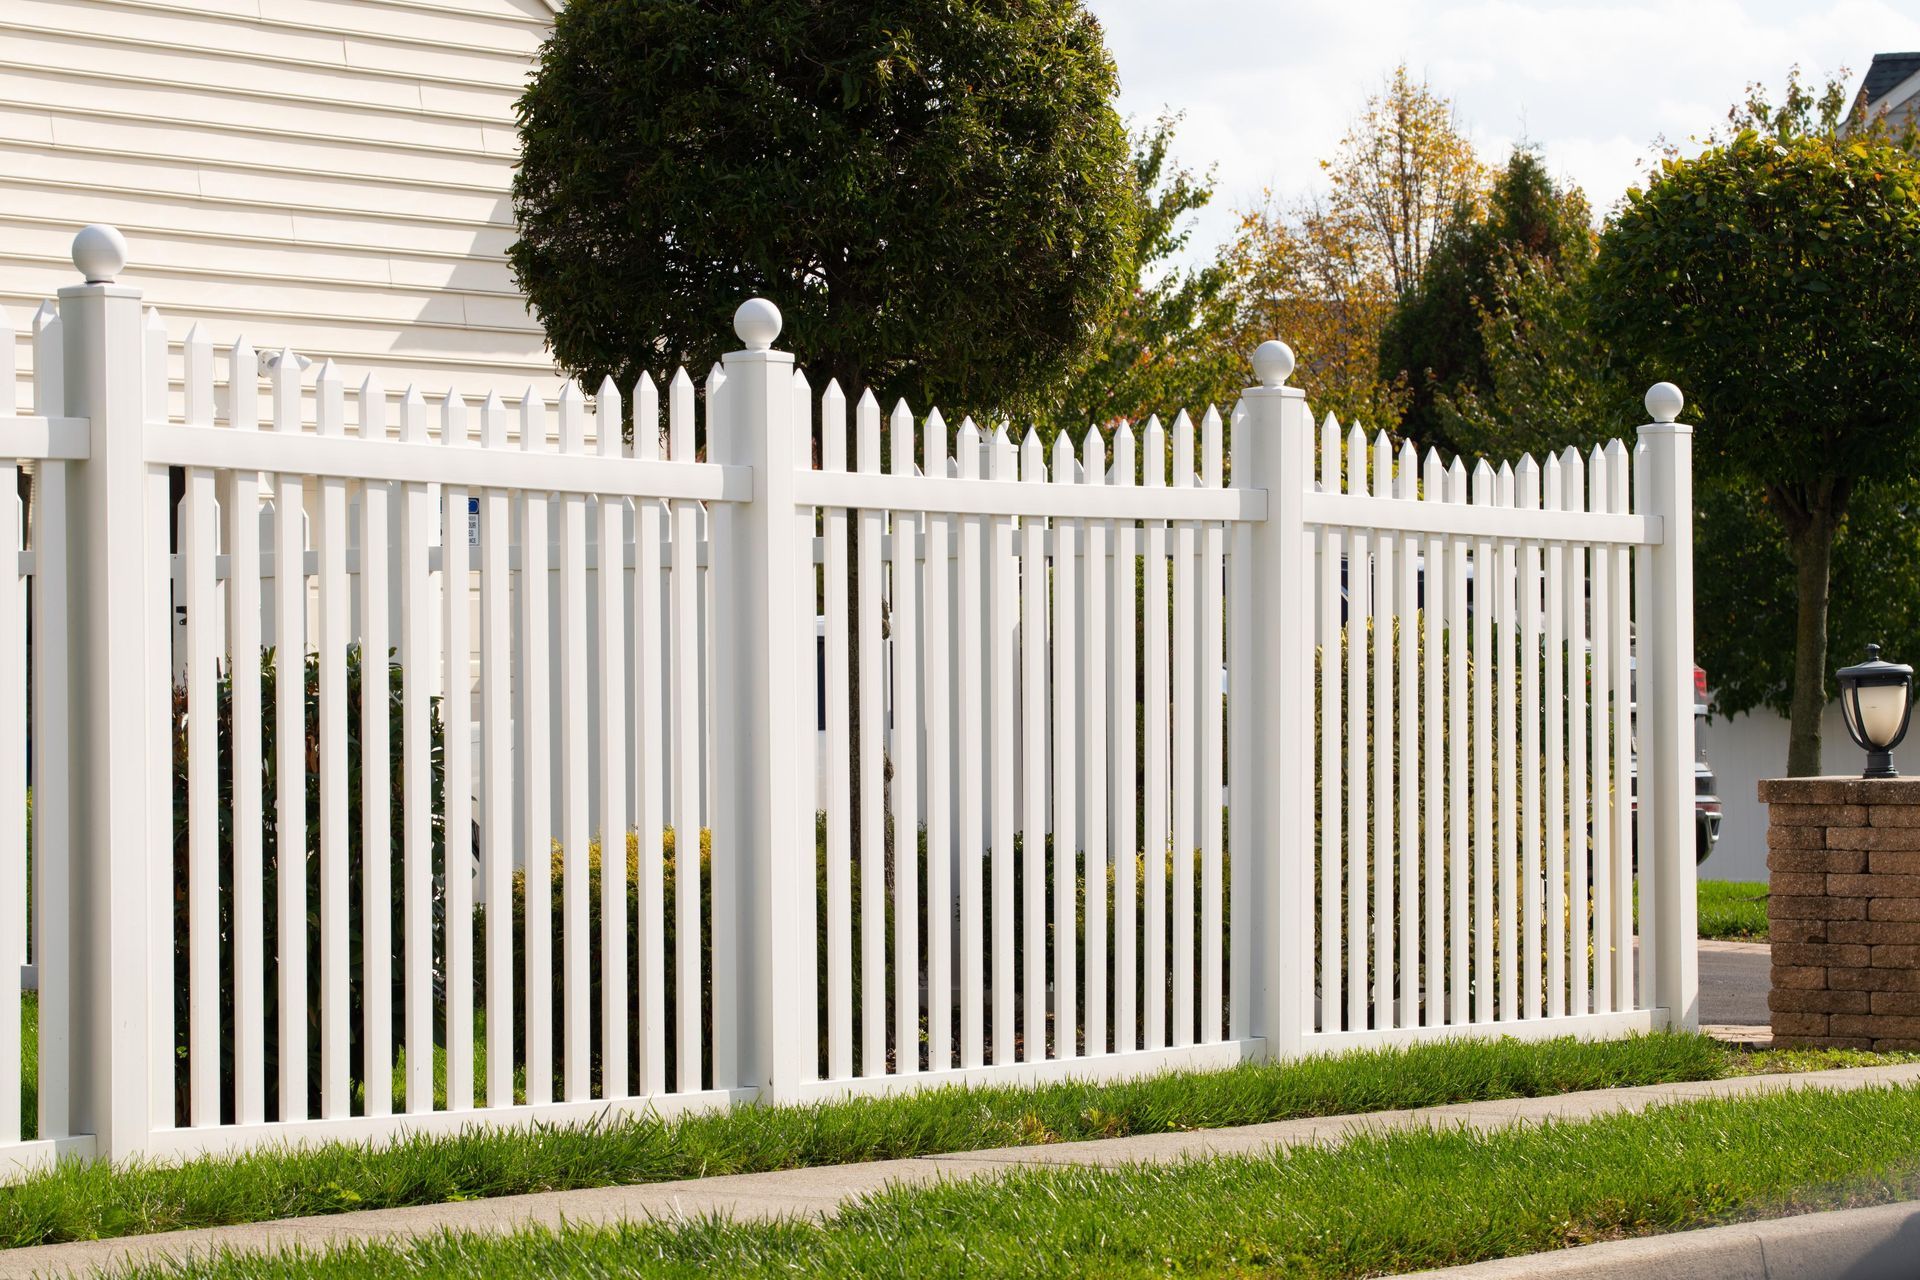 A white picket fence in front of a house